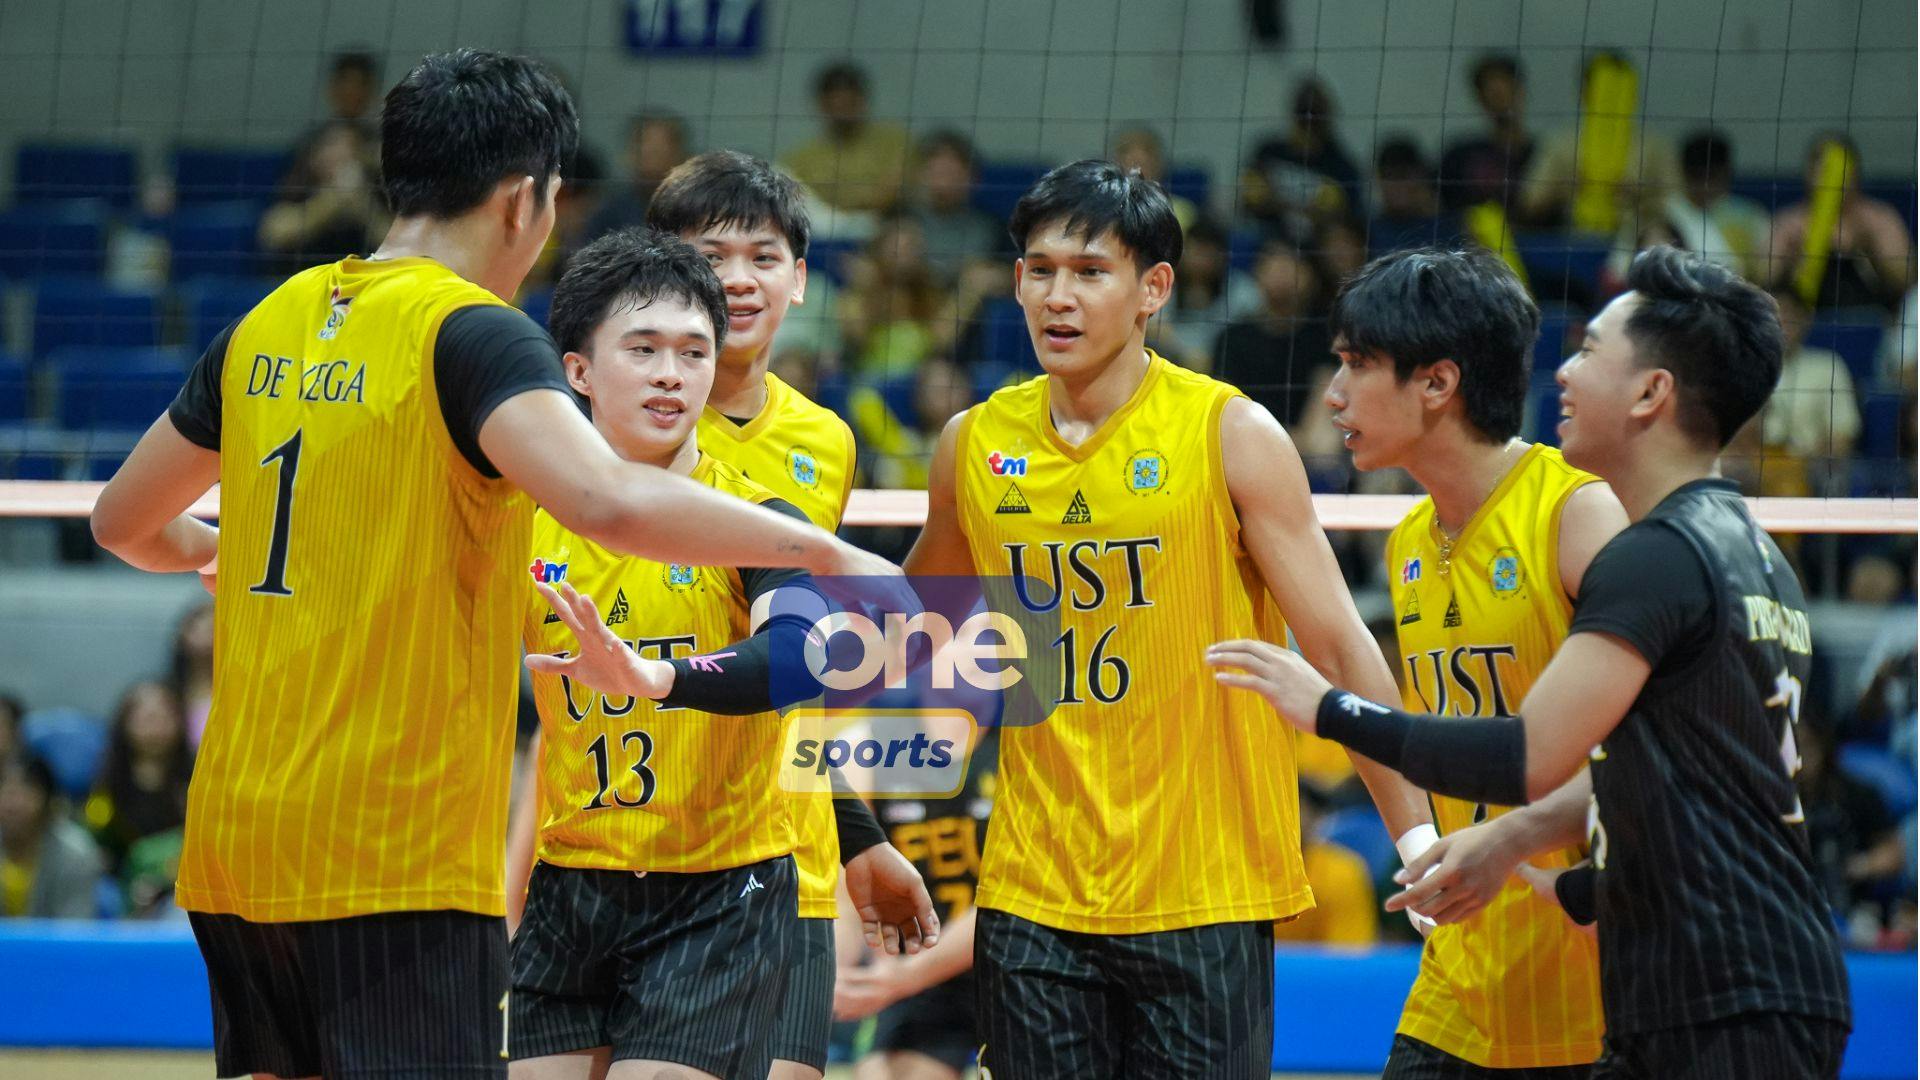 UAAP: UST becomes first no. 4 seed to advance to Finals after eliminating FEU in Final Four